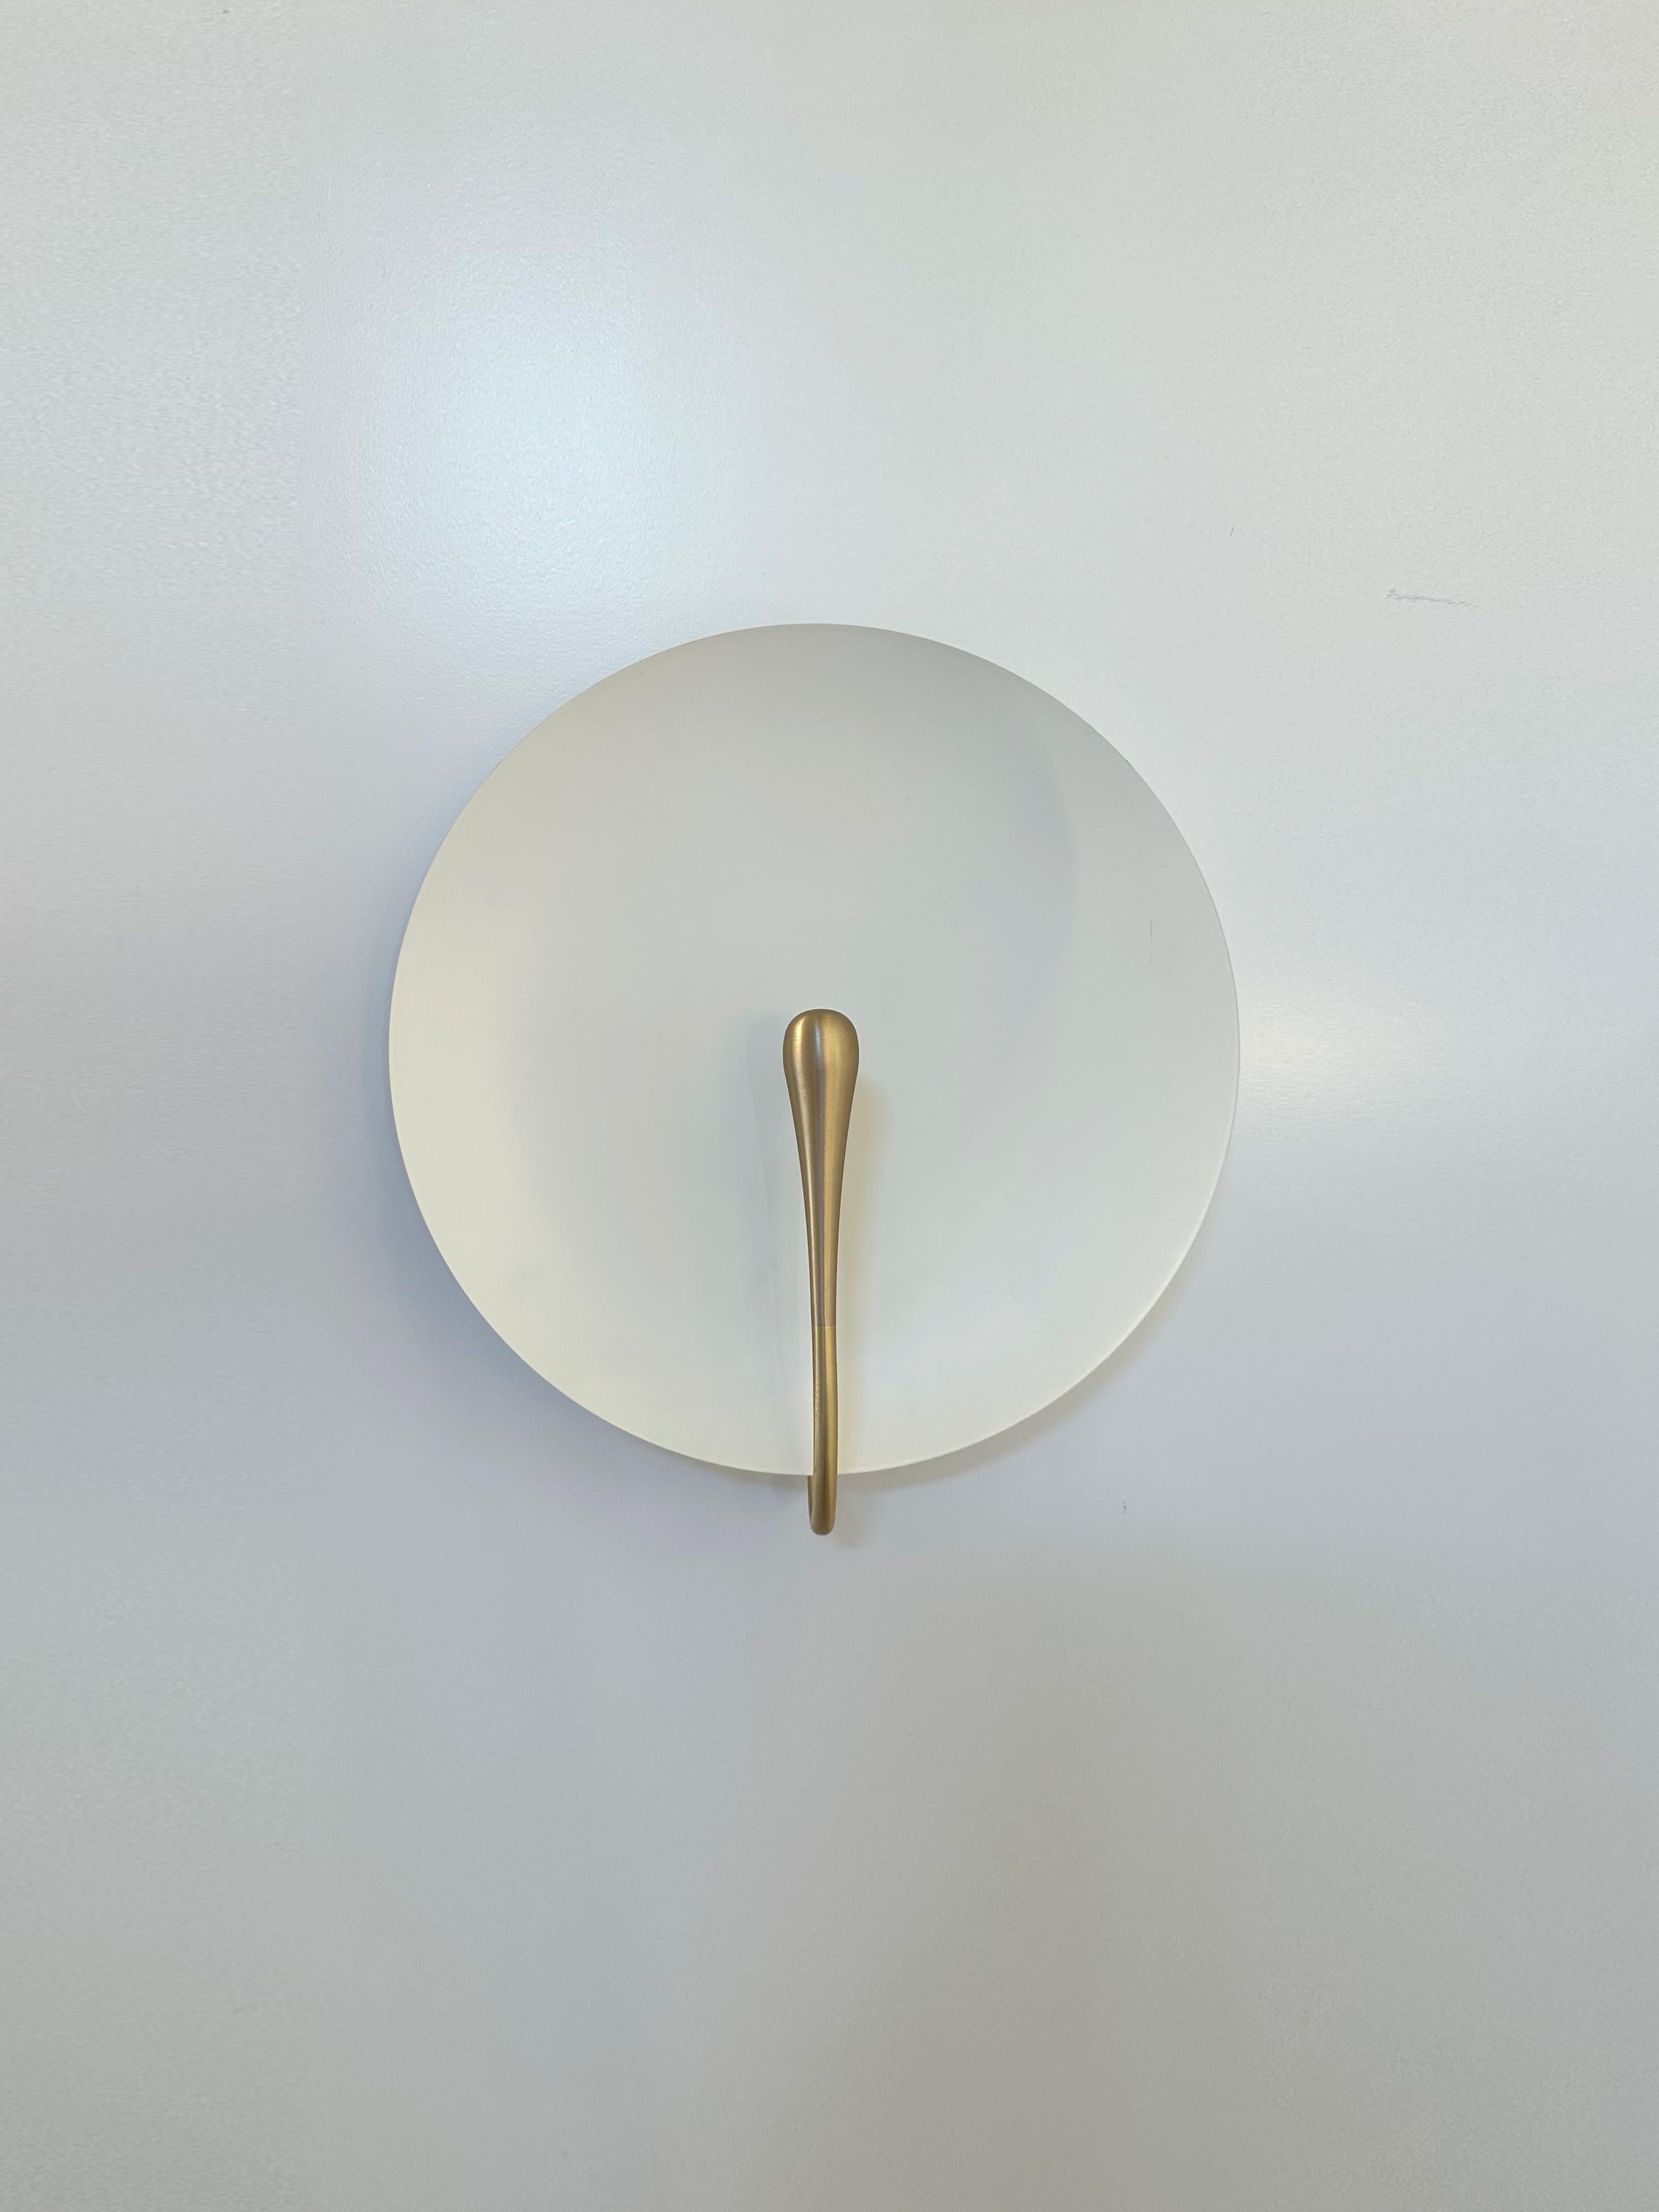 An experiment between designer and maker, this sconce is one of a kind. A matte white piano lacquer is applied to a hand-spun brass plate to create this unique finish. Each of our brass plates is hand spun in London, with each having slight